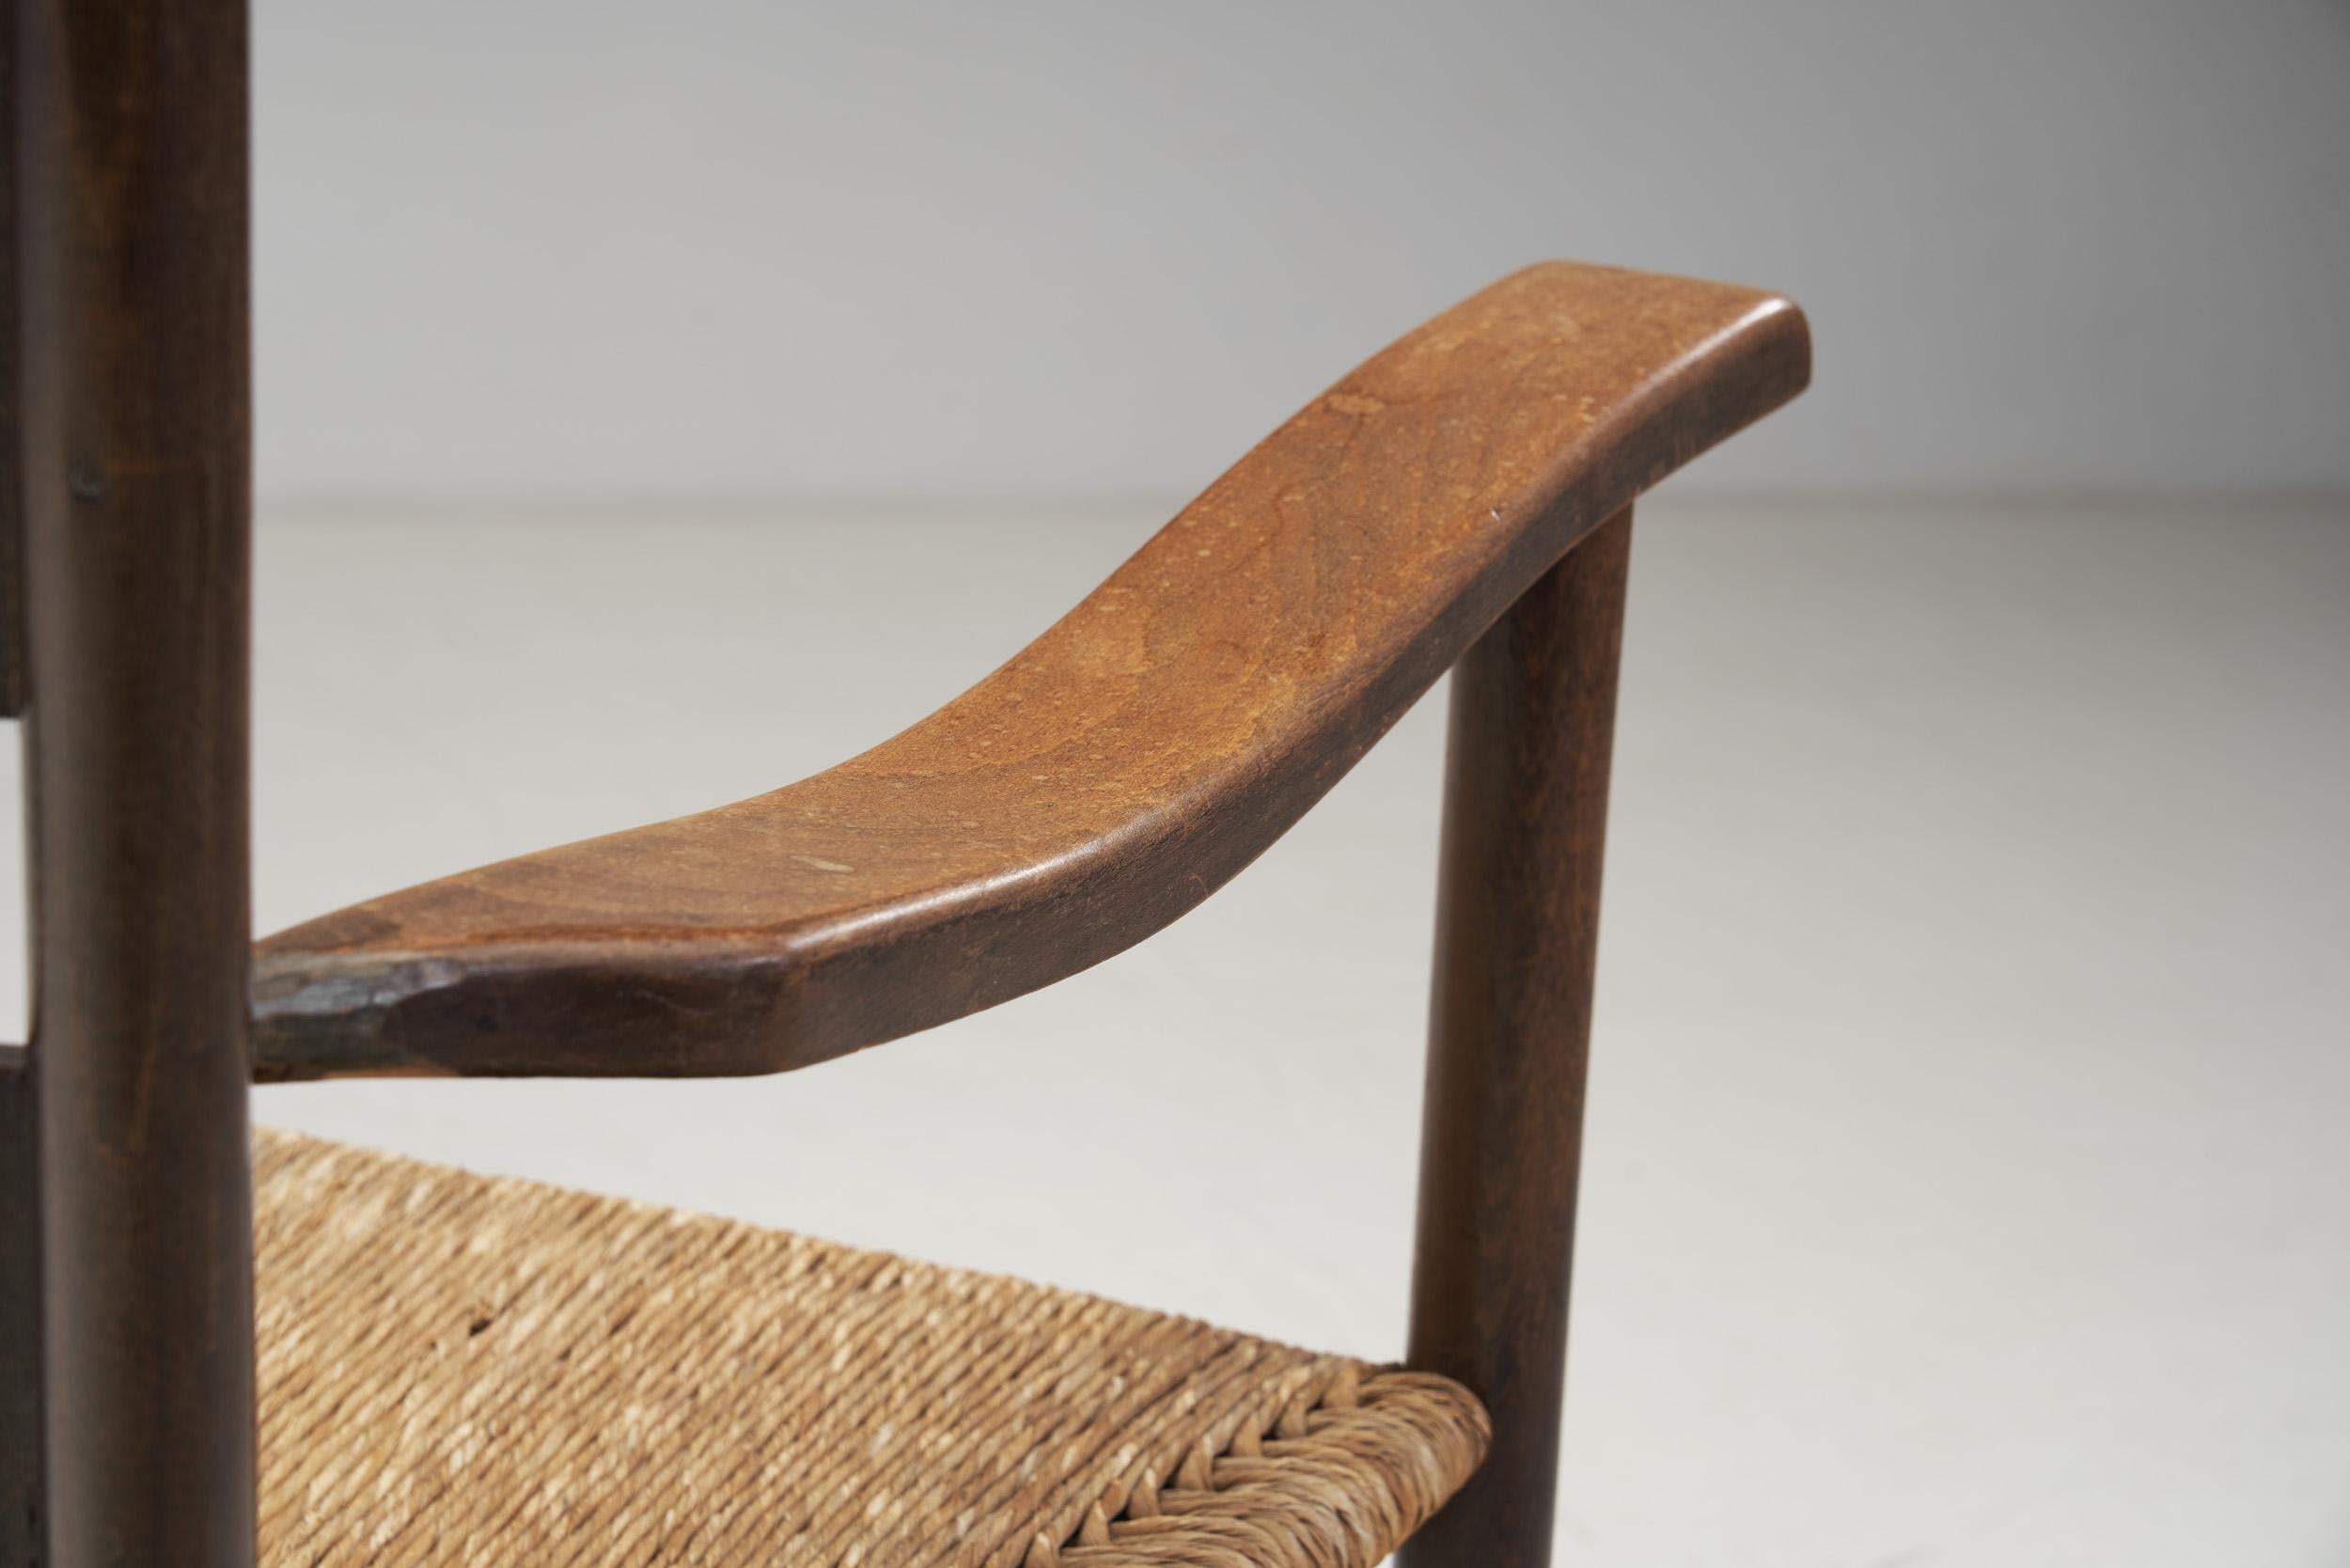 European Modernist Oak and Straw Armchairs, Europe, 1960s For Sale 8